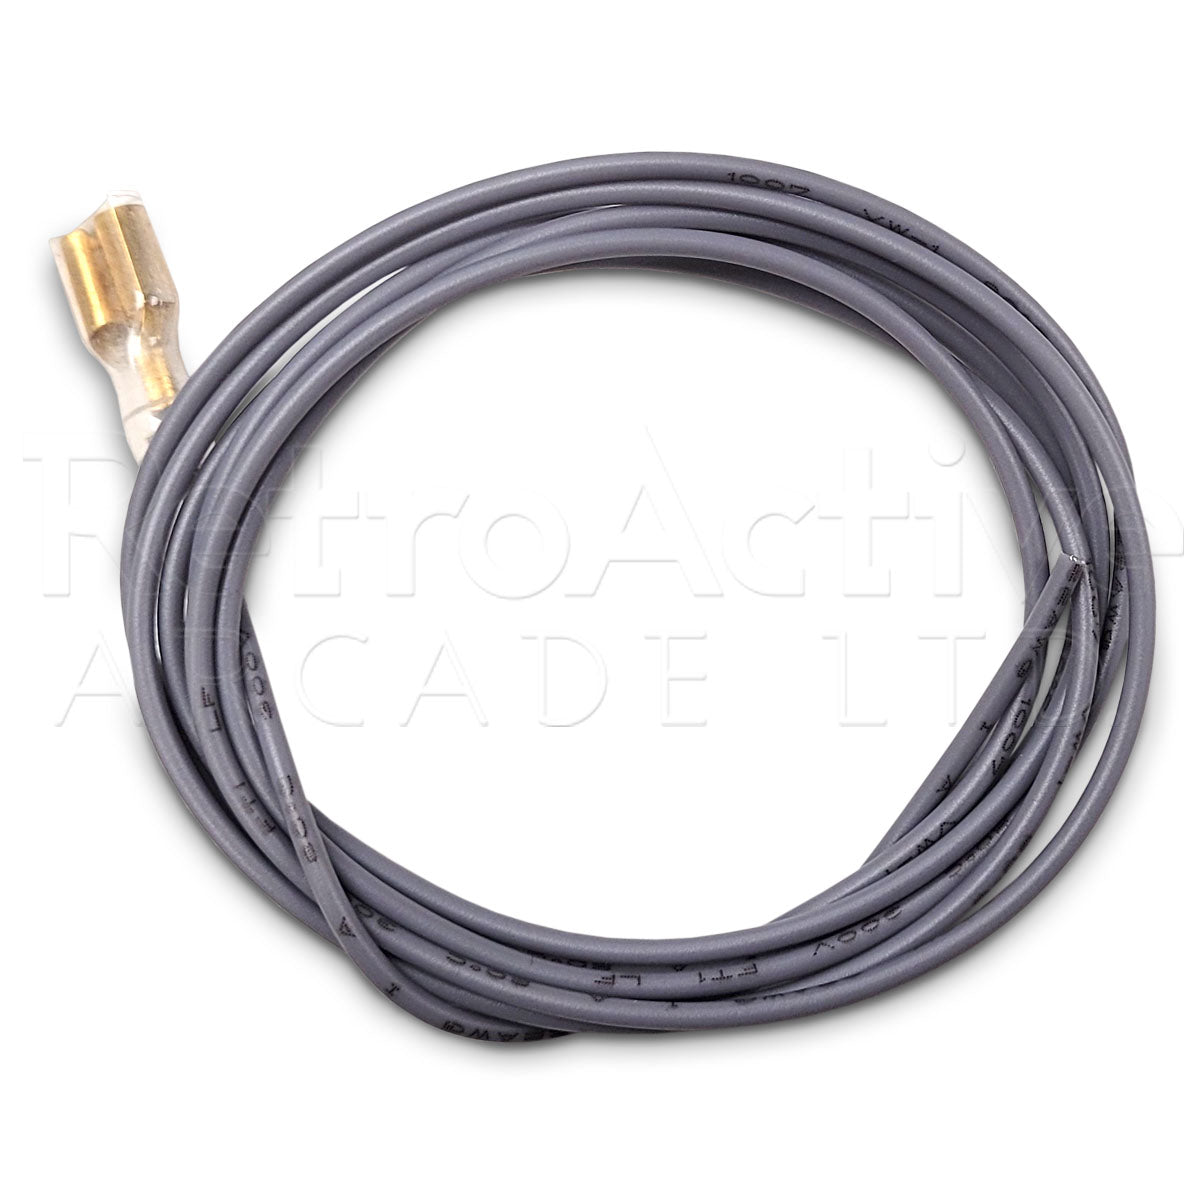 1 Meter Wire with .110" Connector - Gray Wiring & Harnesses Universal - Retro Active Arcade